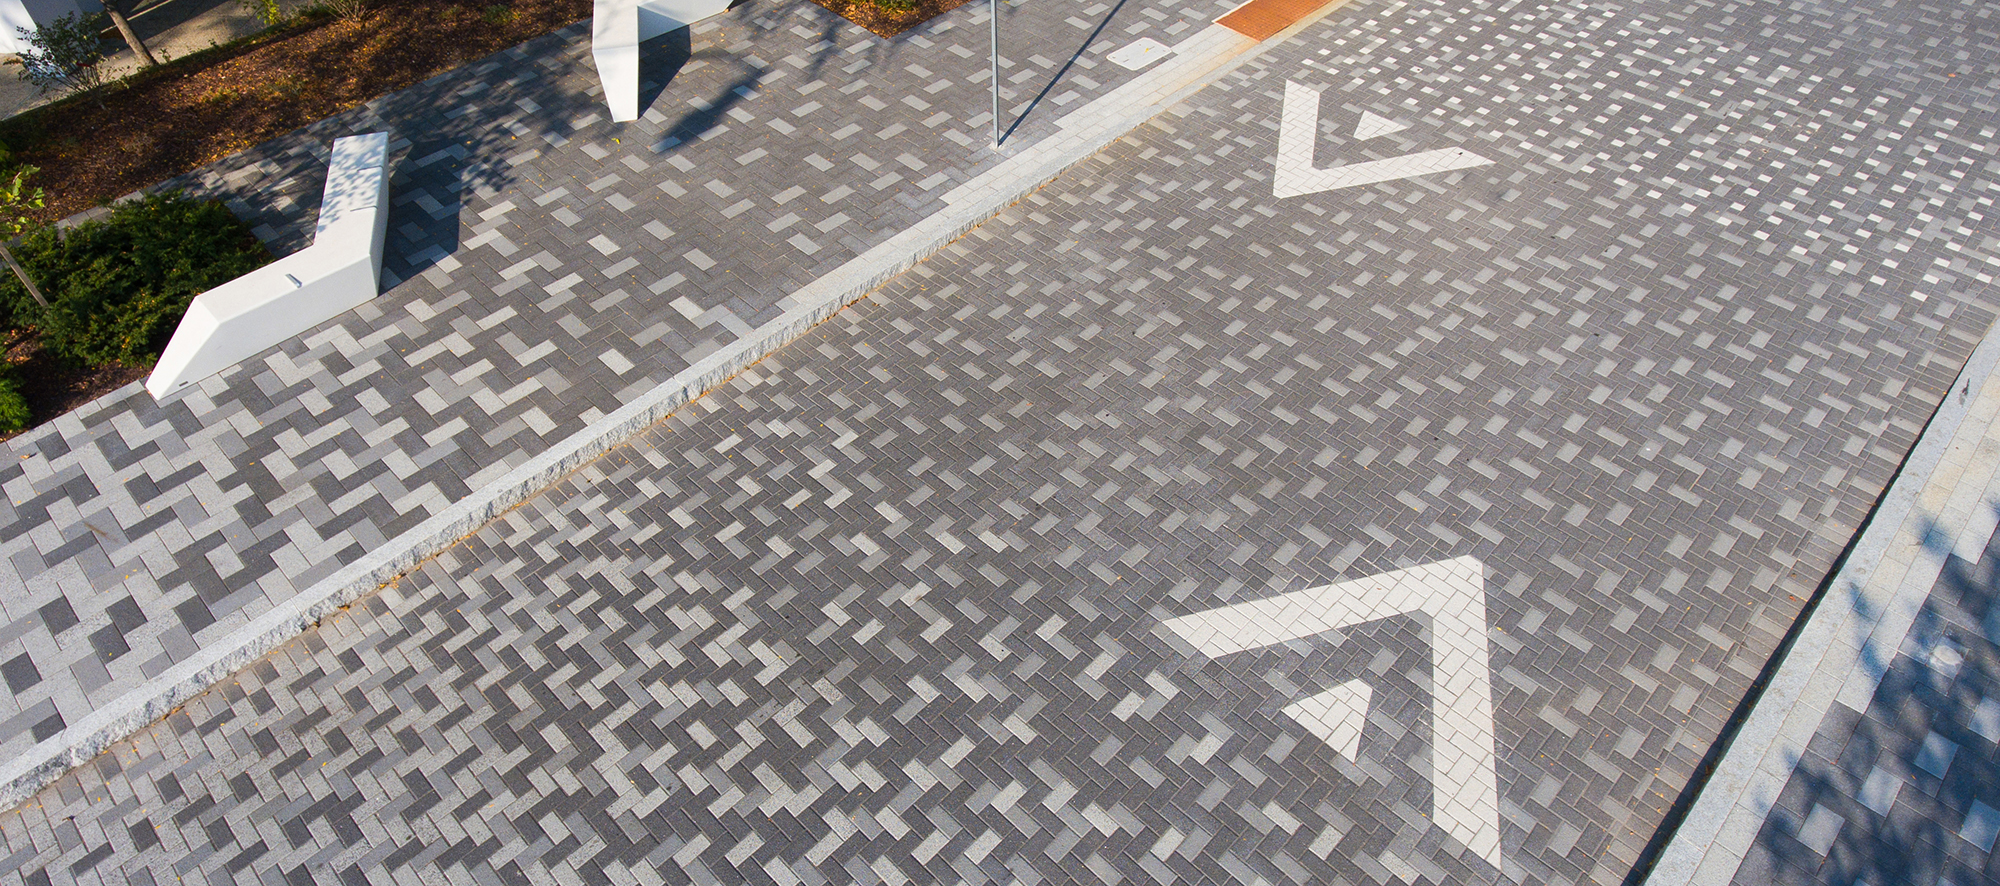 A vibrant, pixelated design using Series pavers features directional arrows for vehicular traffic, and elevated walkways for pedestrians.